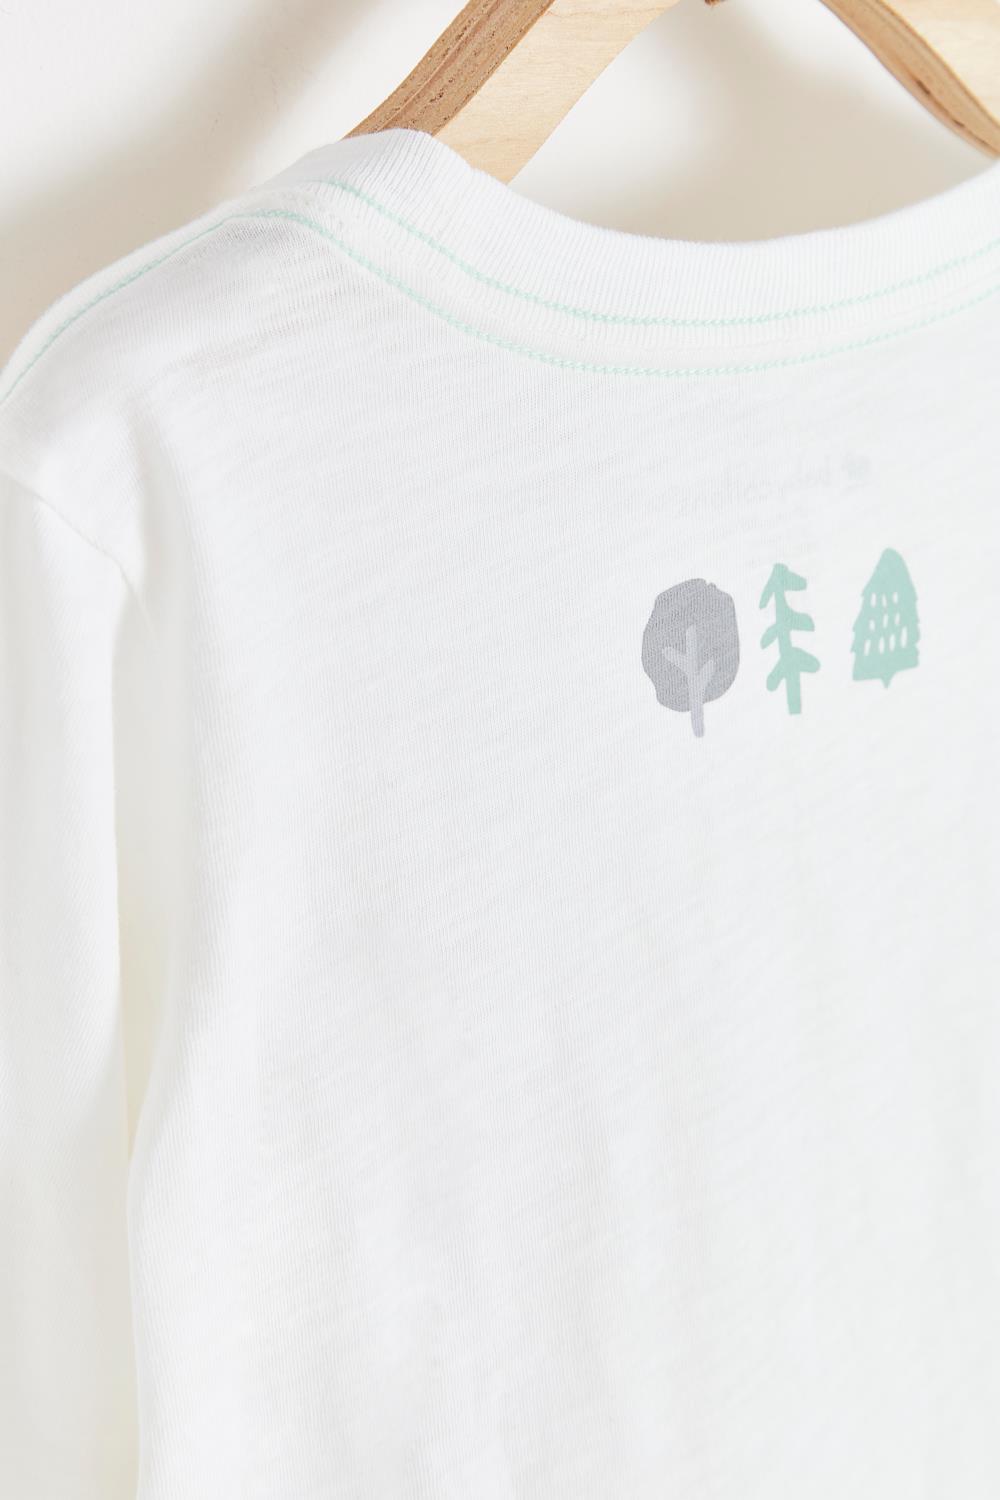 T-SHIRT TAYLOR FOREST